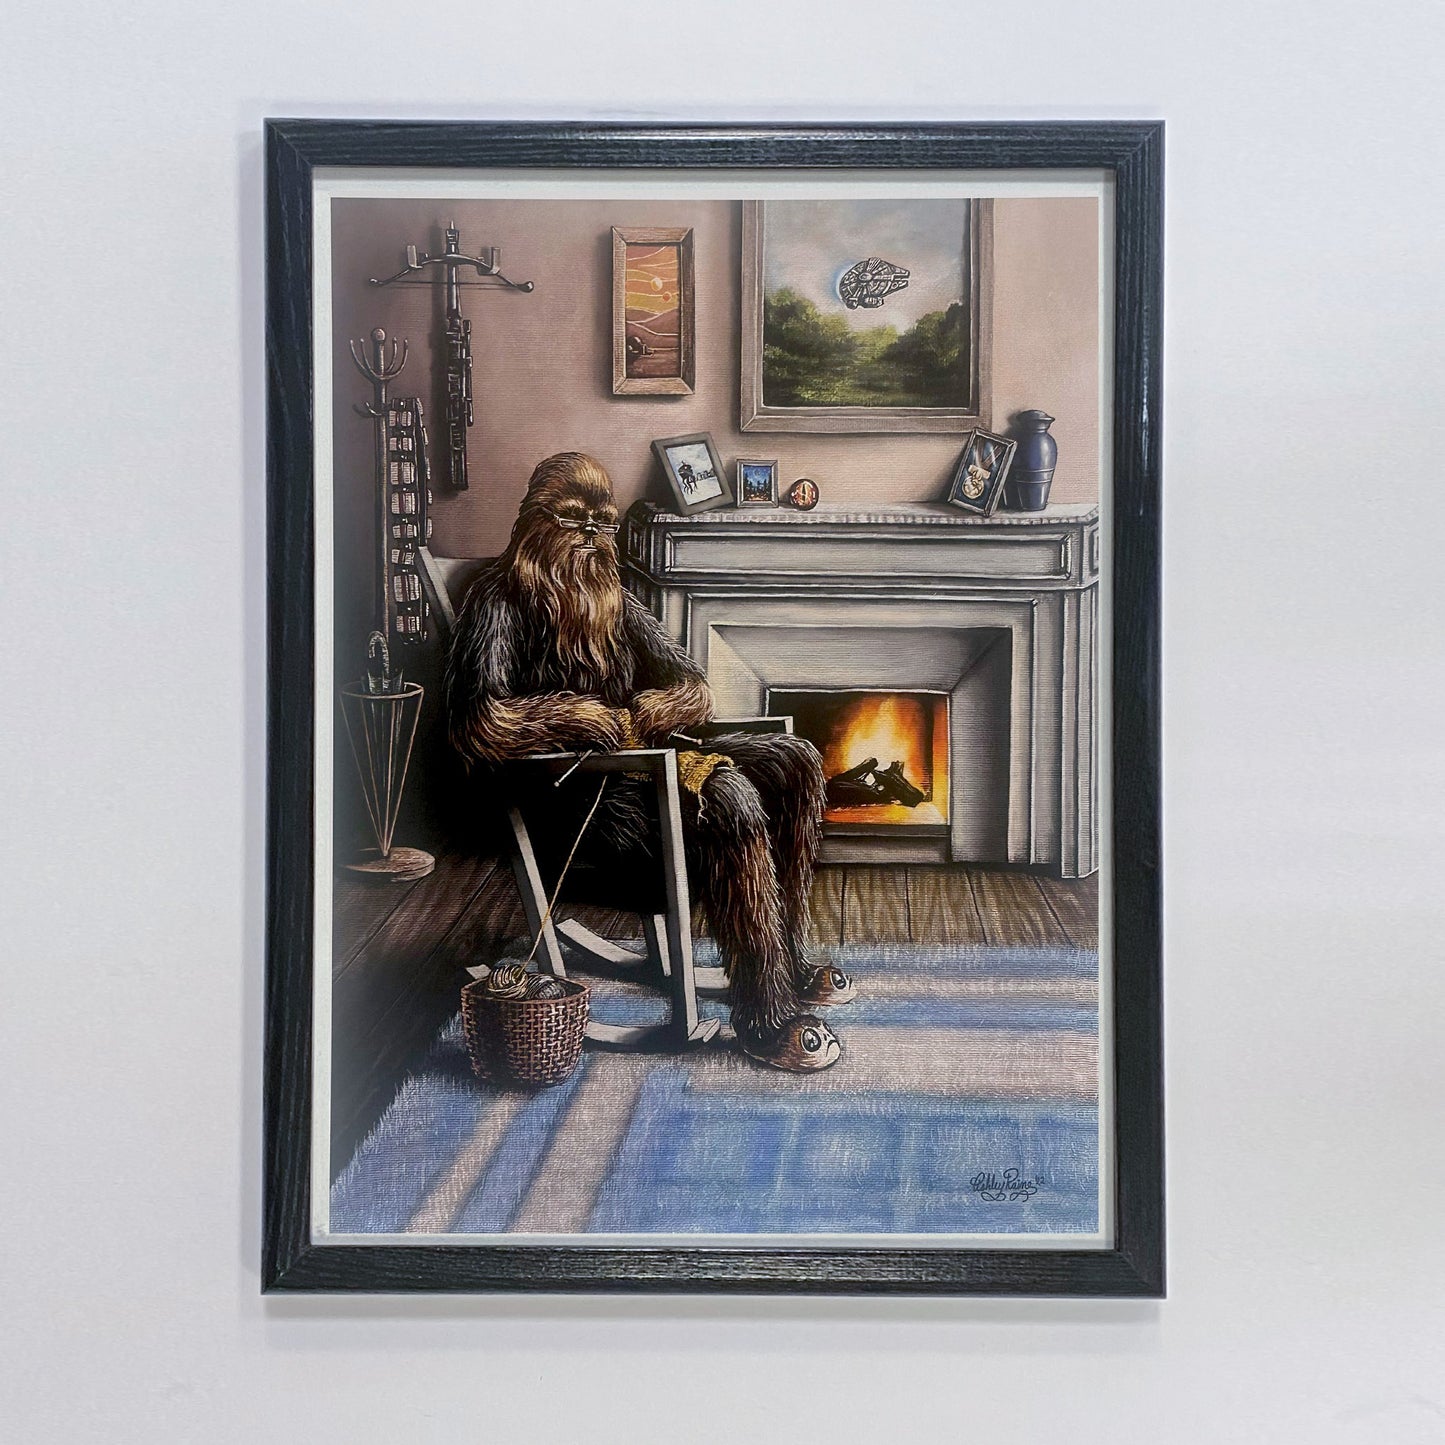 Chewbacca by the Fireplace "The Good Life" (Star Wars) Parody Art Print